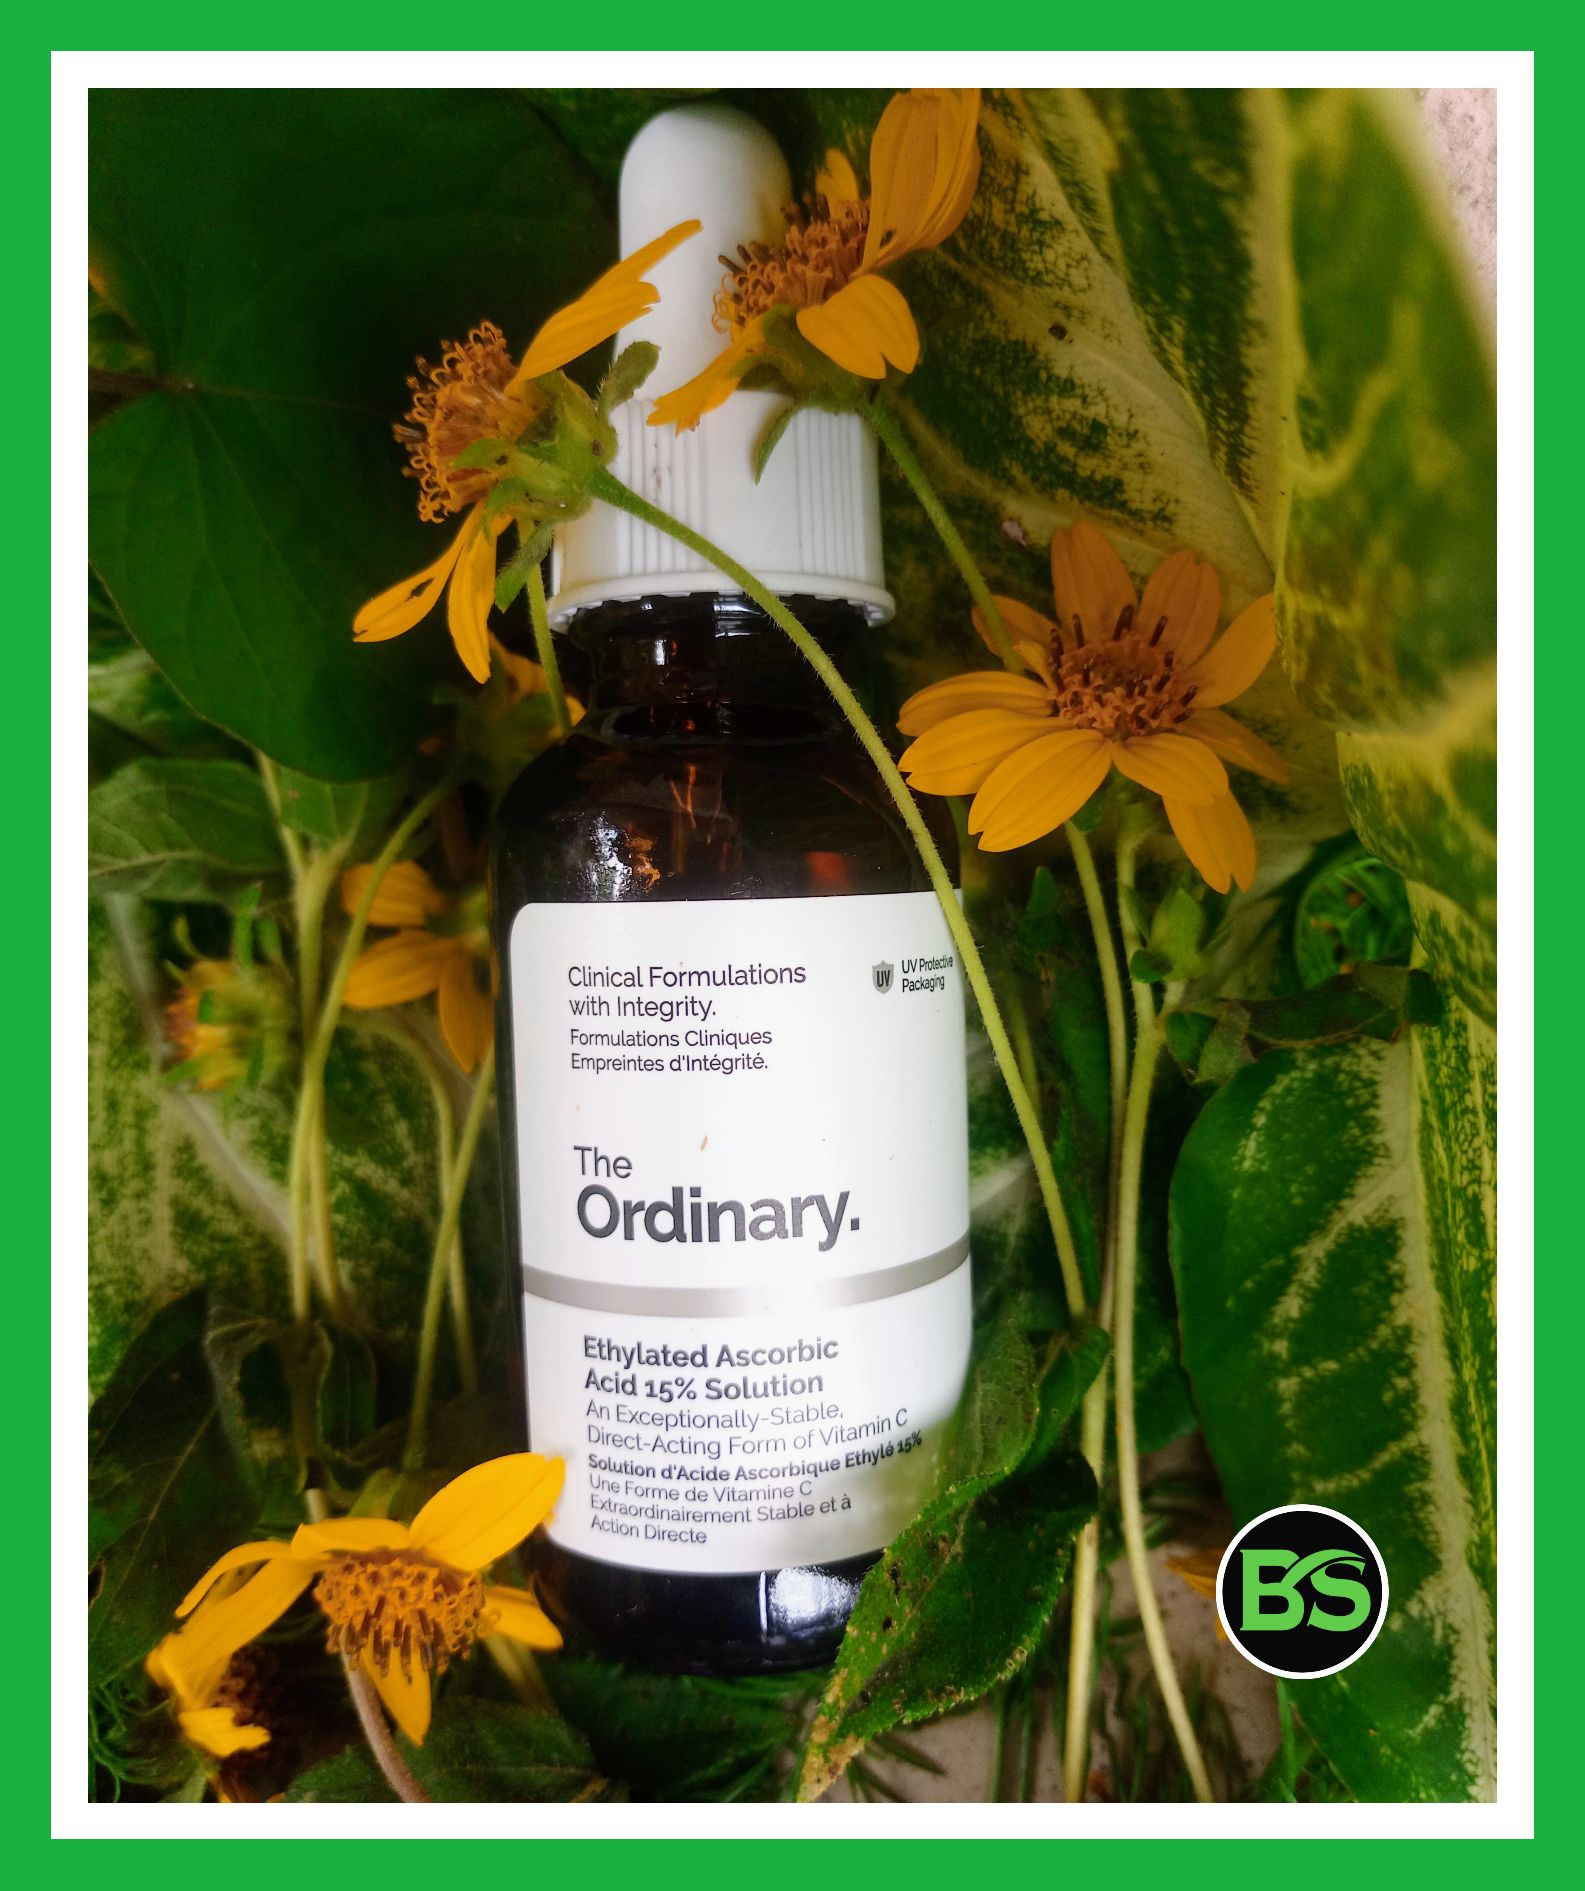 The Ordinary Ethylated Ascorbic Acid review 